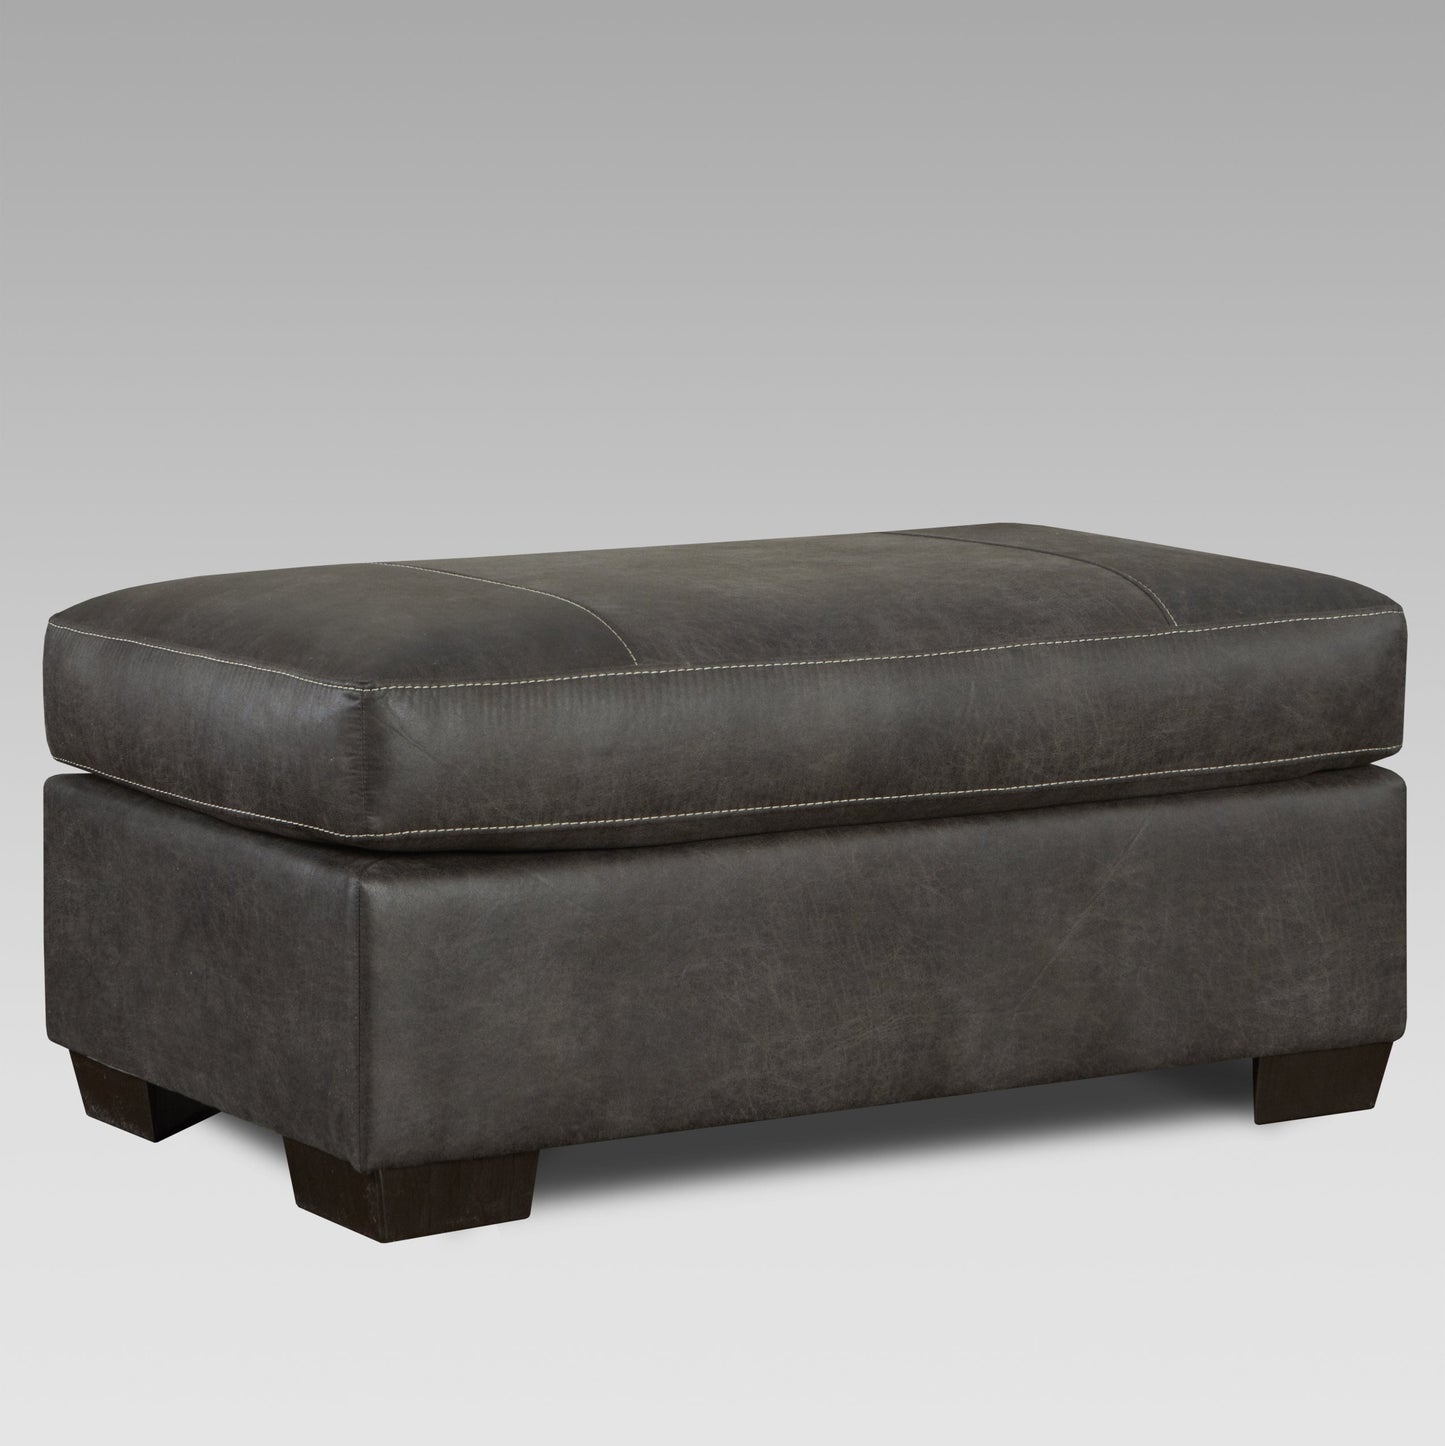 Tirana Contemporary Fabric Pillow-top Arm Sectional Sofa with Ottoman in Sequoia Ash